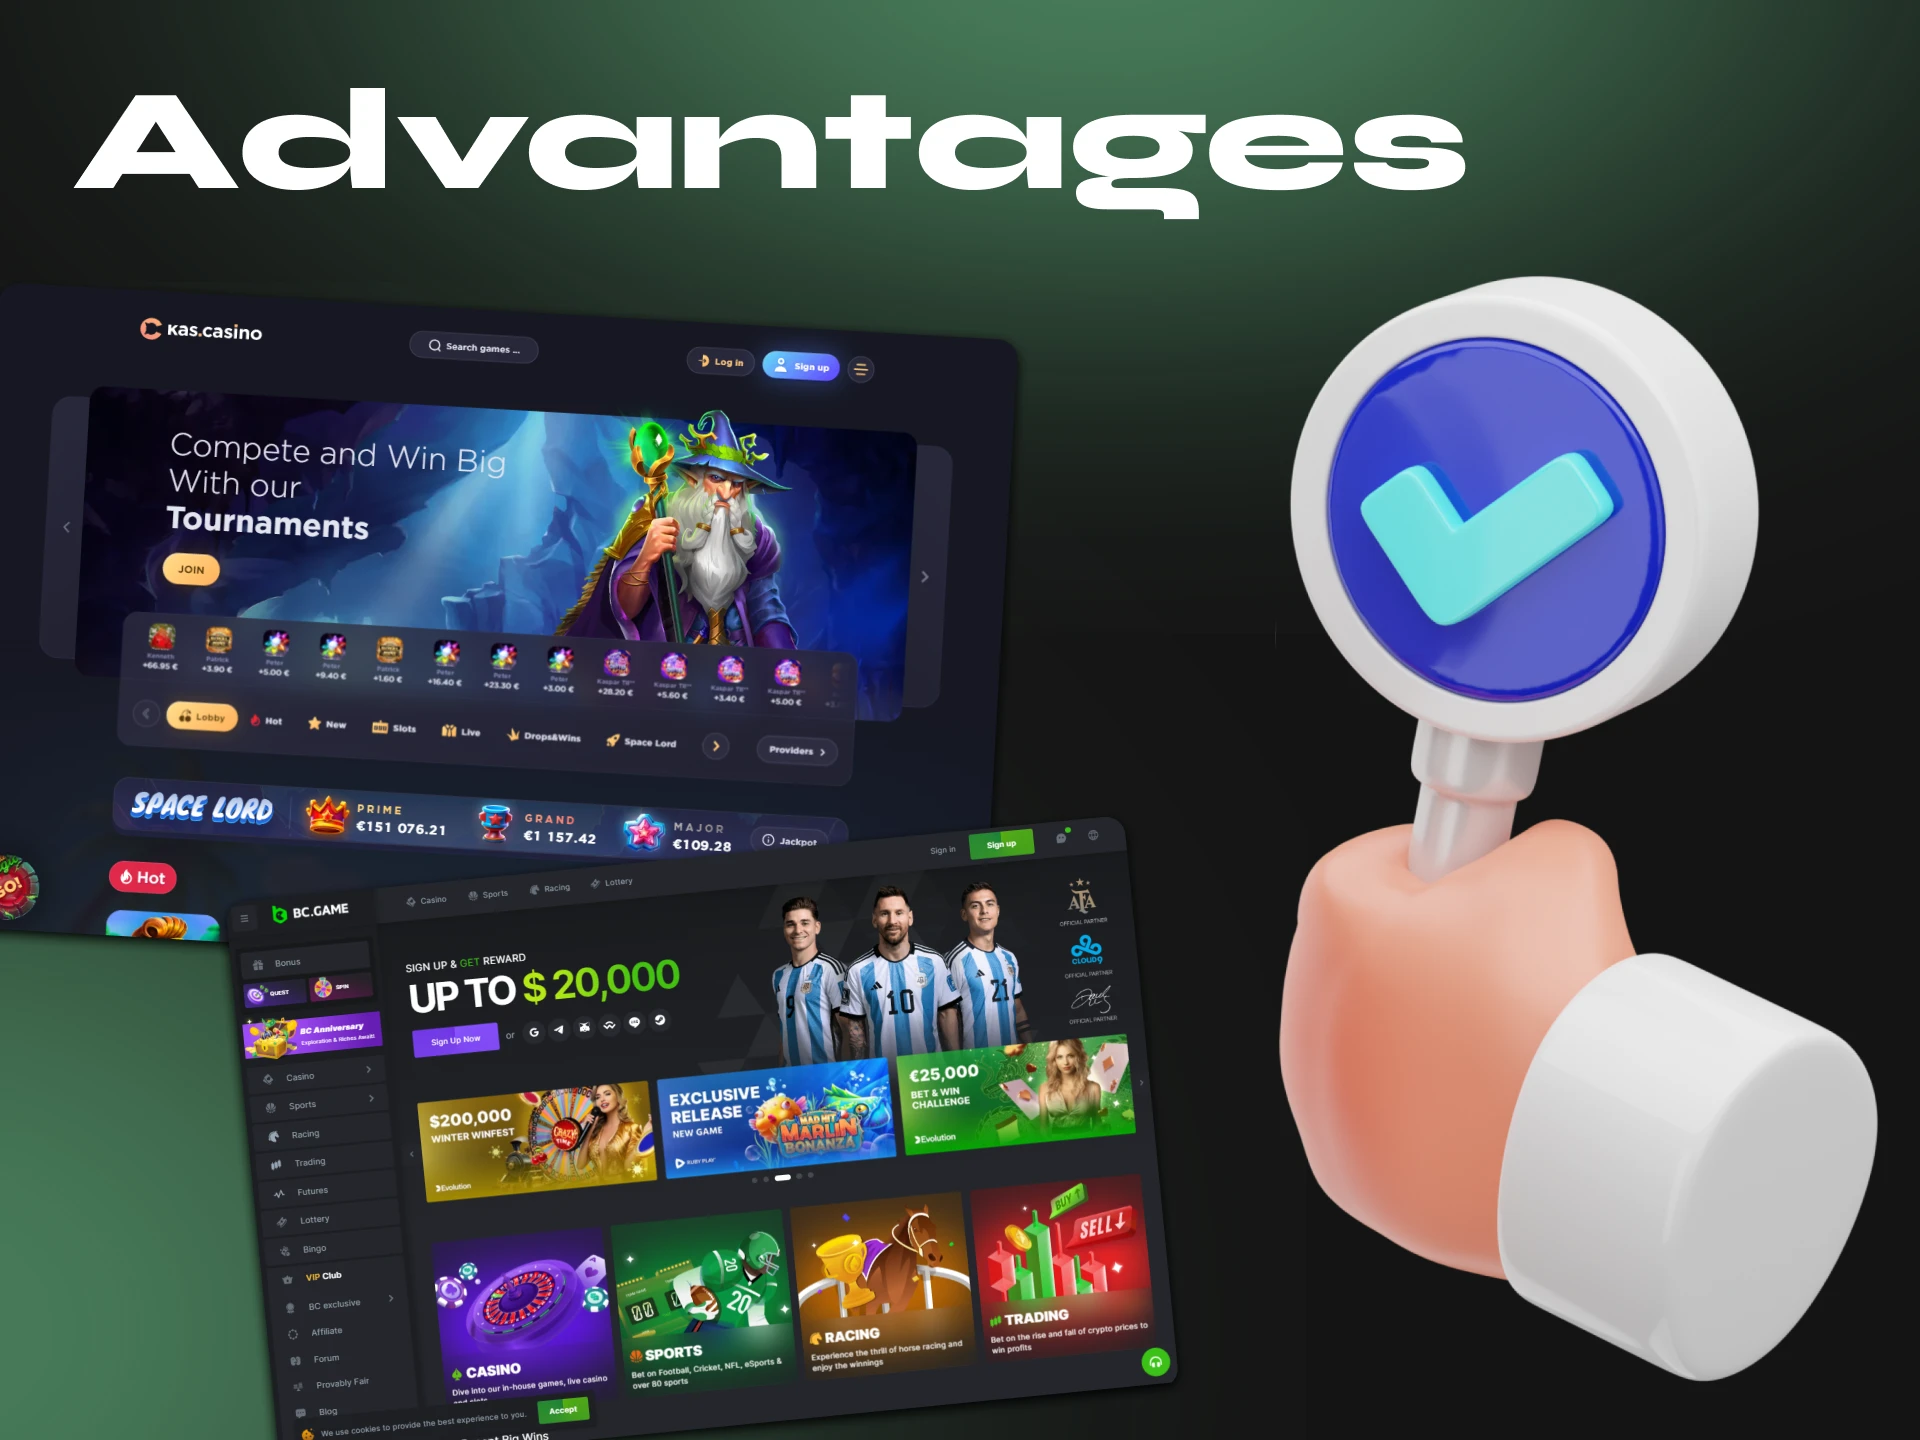 Find out what advantages a crypto casino has over a traditional online casino.